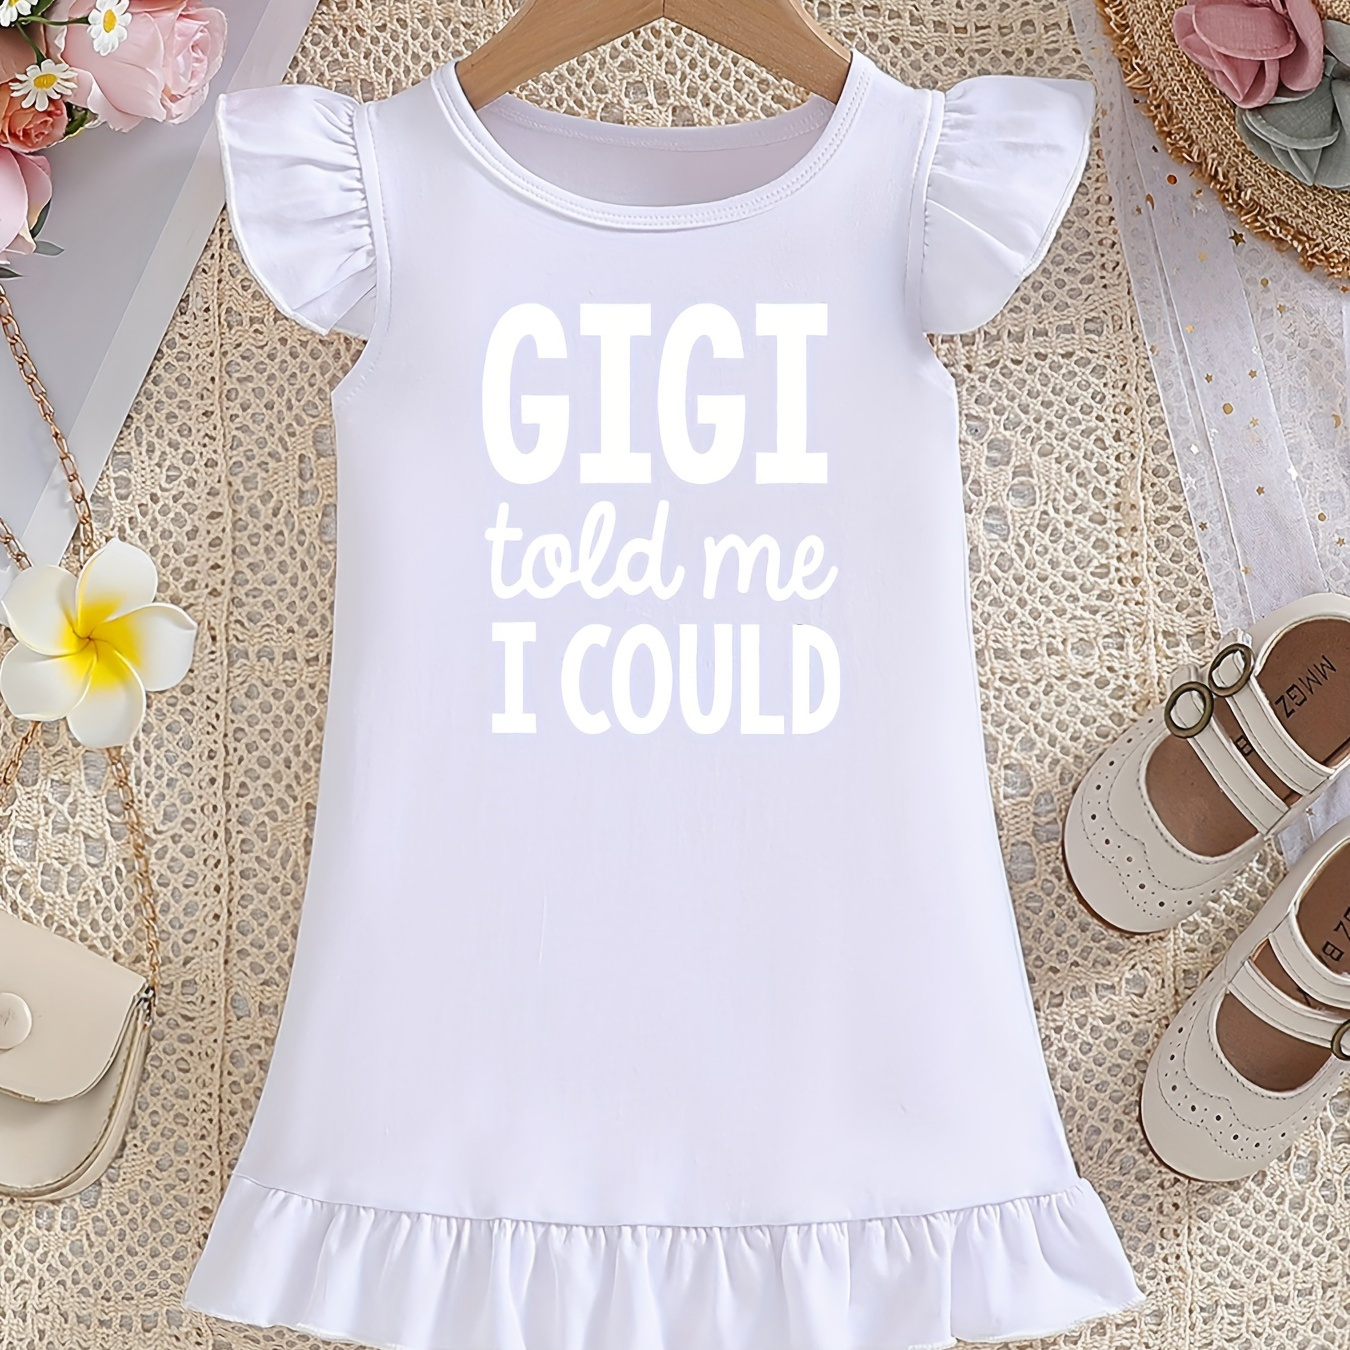 

Baby Girls' Ruffle Sleeve Round Neck Dress, Cotton Loose-fit Fashion Cartoon Gigi Told Me I Could Letter Print, Cute Style